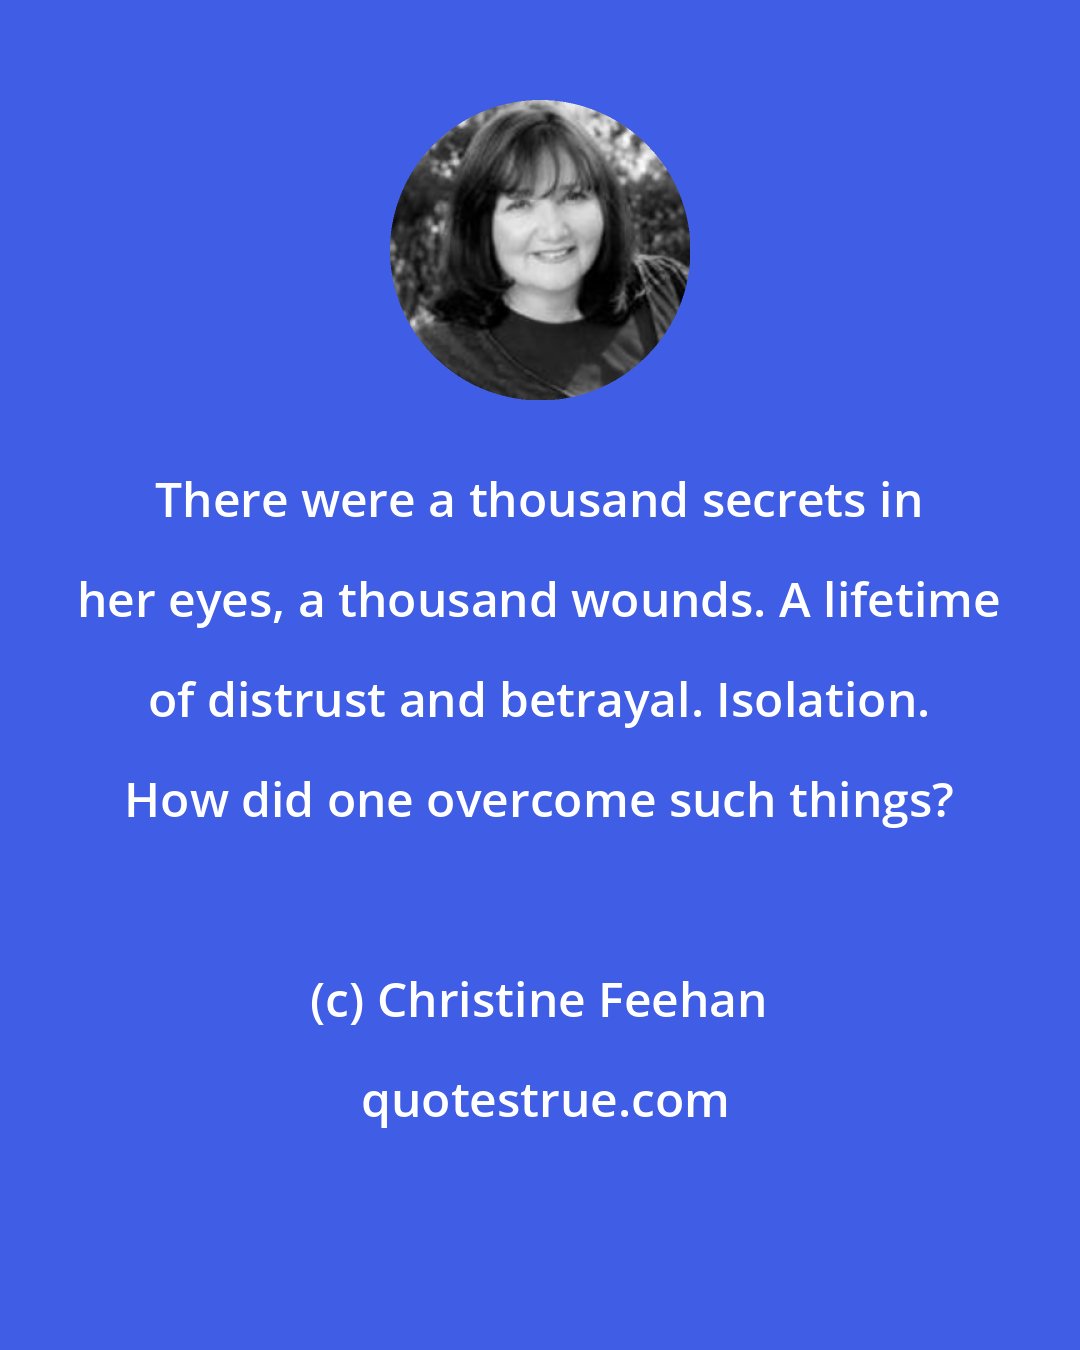 Christine Feehan: There were a thousand secrets in her eyes, a thousand wounds. A lifetime of distrust and betrayal. Isolation. How did one overcome such things?